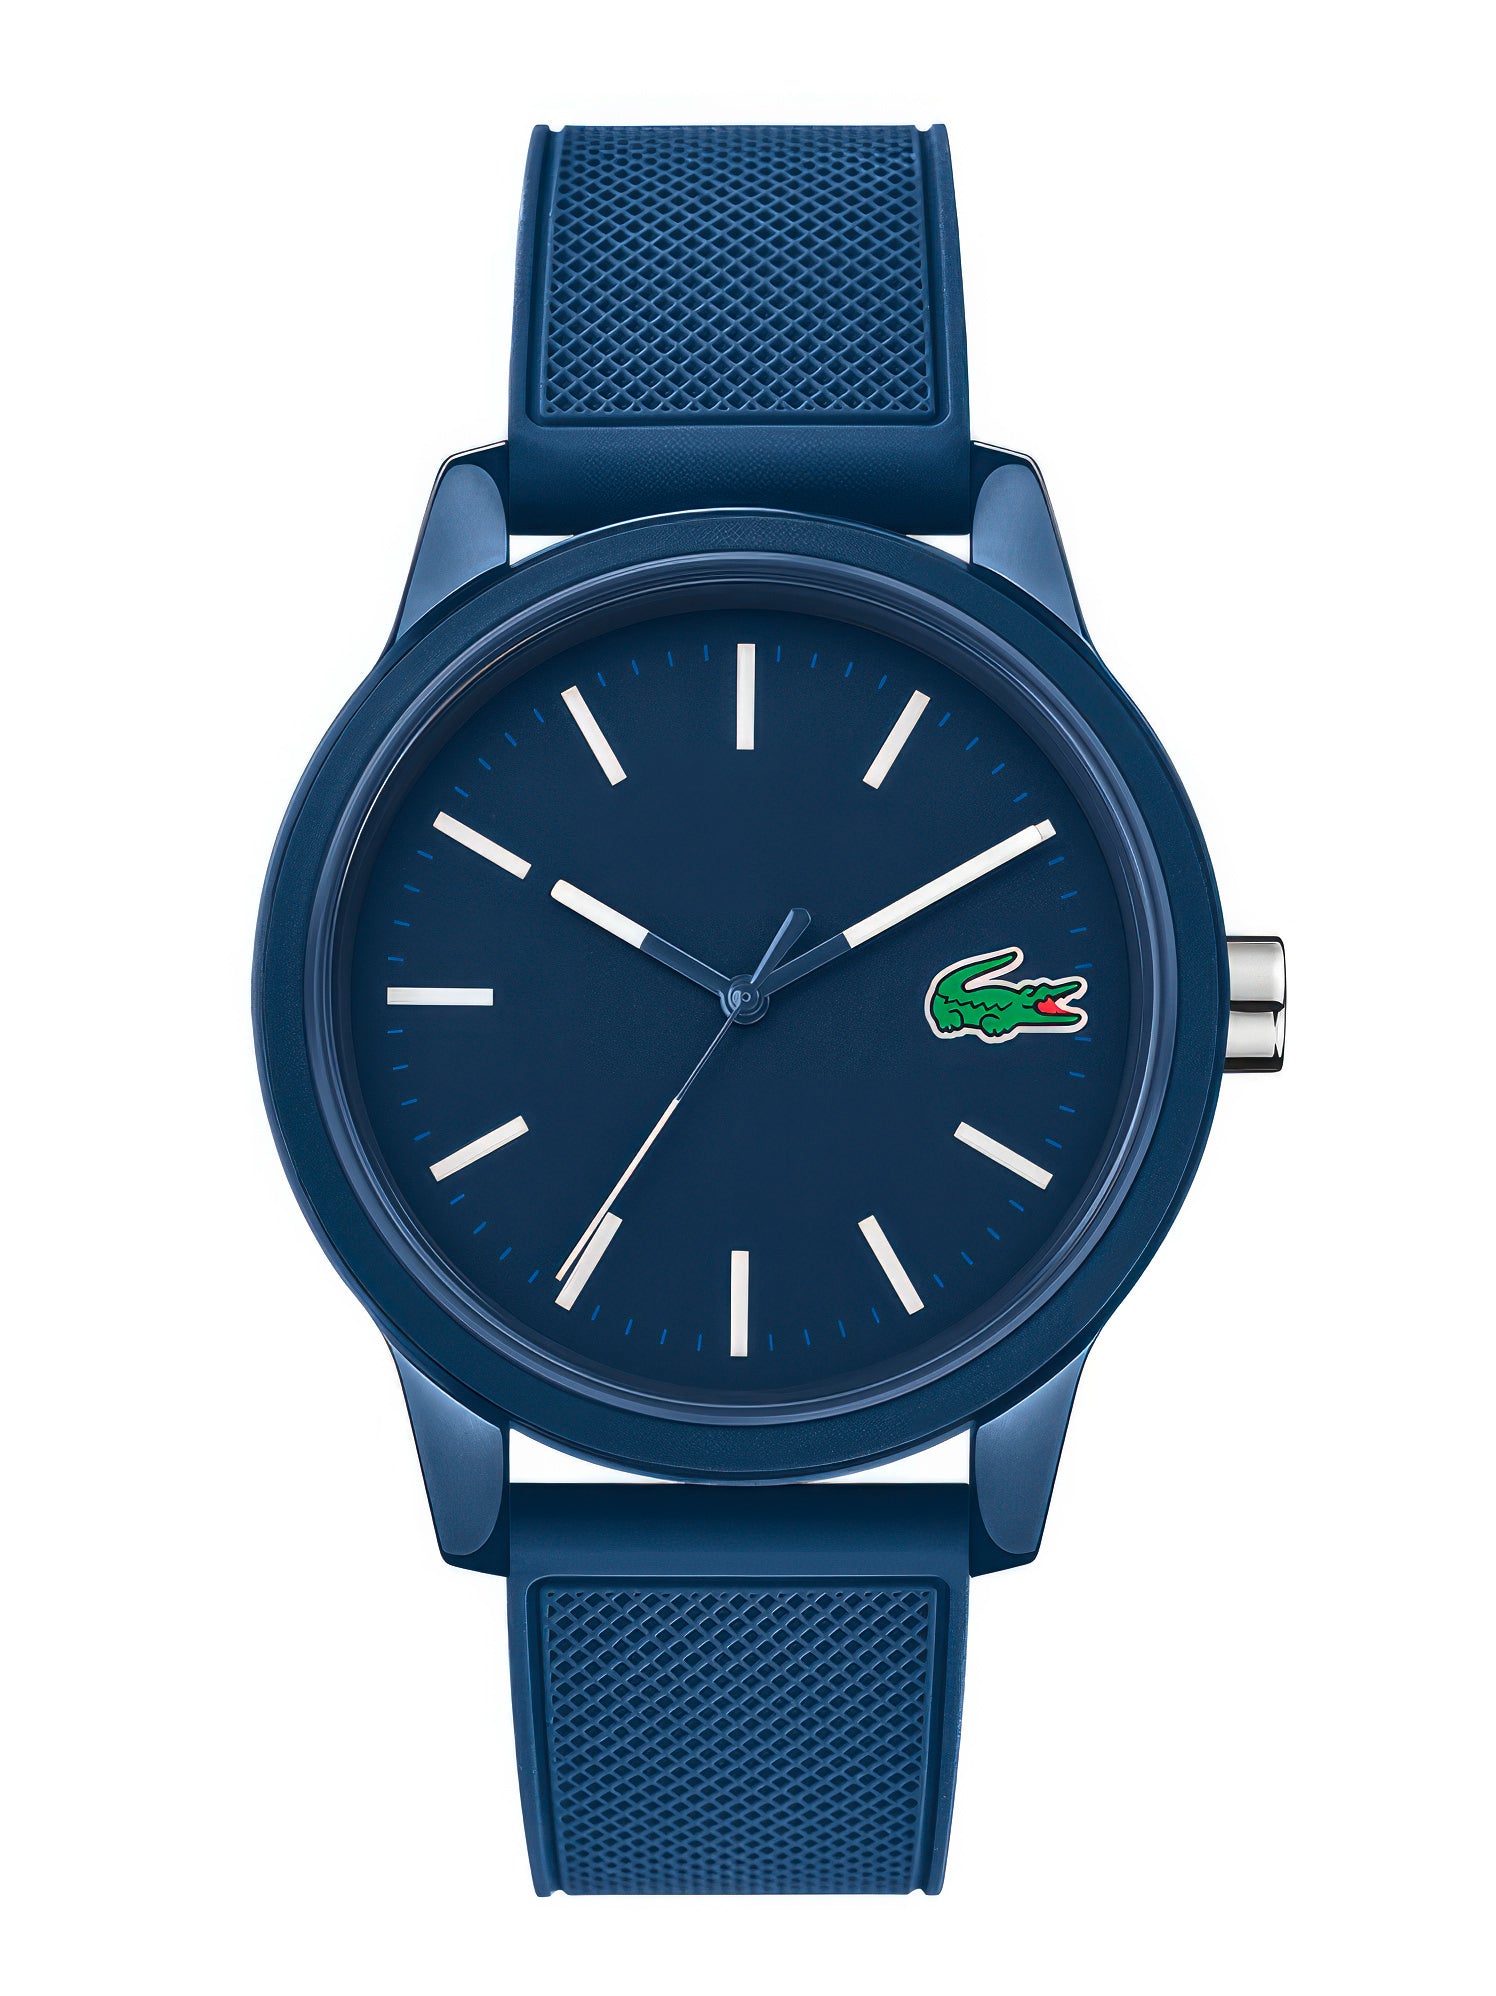 The Men's L.12.12 Blue Casual Watch 2010987 by Lacoste with sporting style in blue.